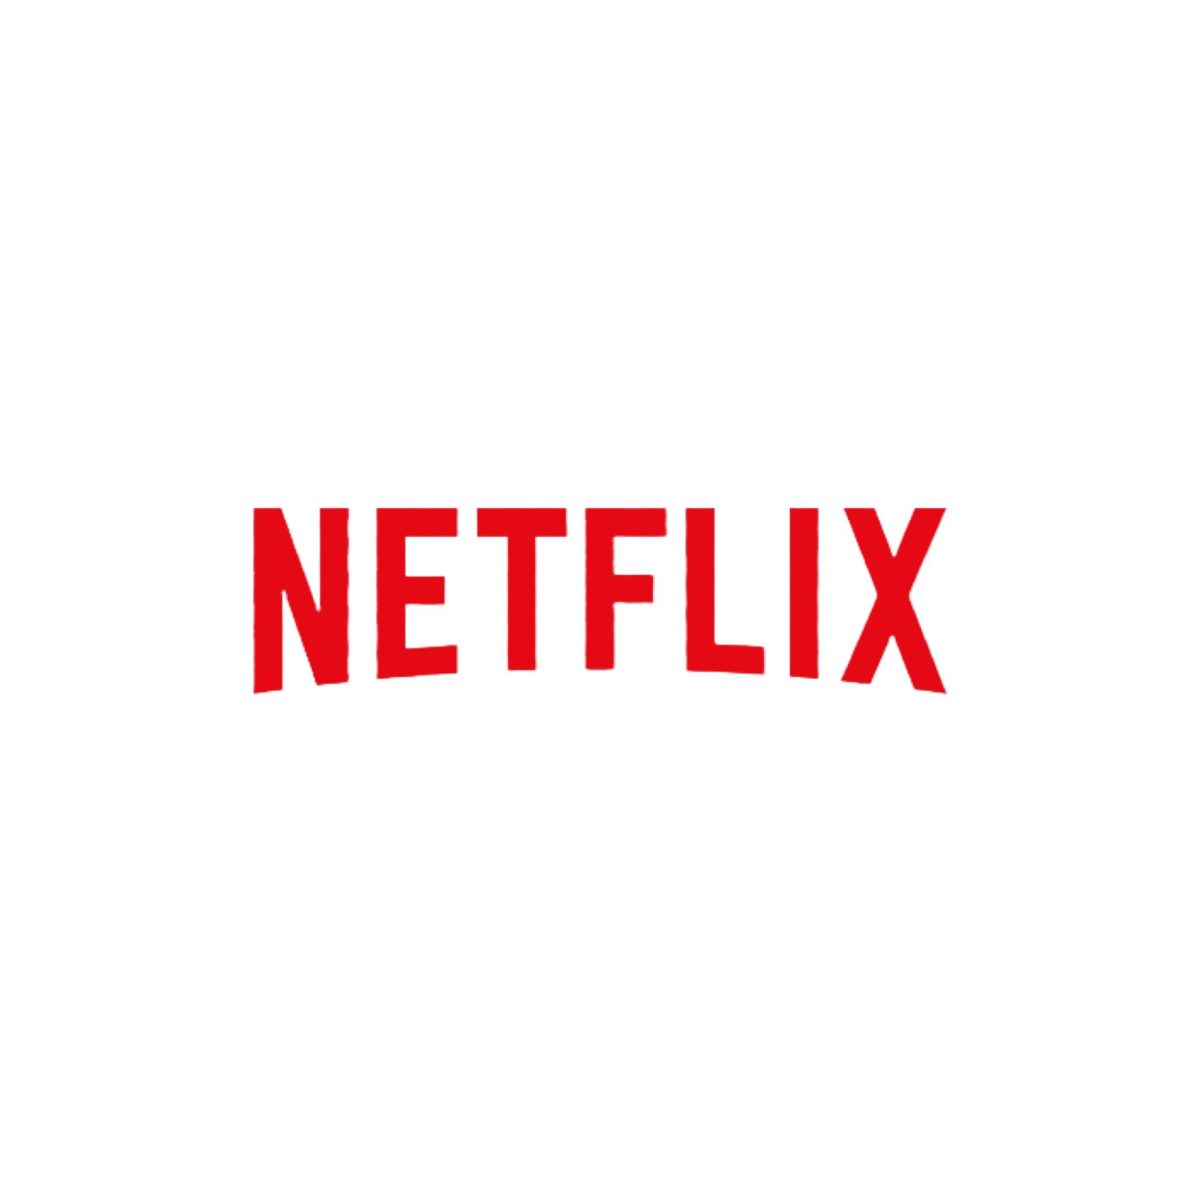 Watching+Netflix+shows+can+be+very+therapeutic%2C+but+when+your+favorite+show+is+canceled+it+can+be+rough.+Netflix+Logomark+by+Netflix+Inc.+is+licensed+under+Public+Domain.